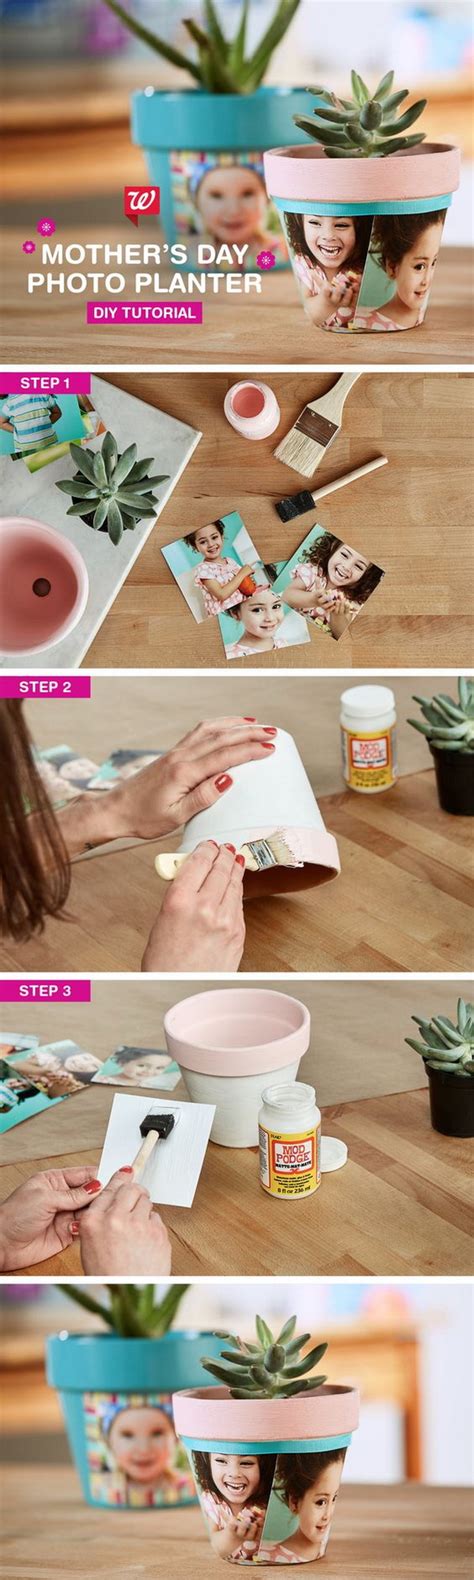 Best gifts for mom birthday diy. 20+ Best Gifts For Mom - Hative